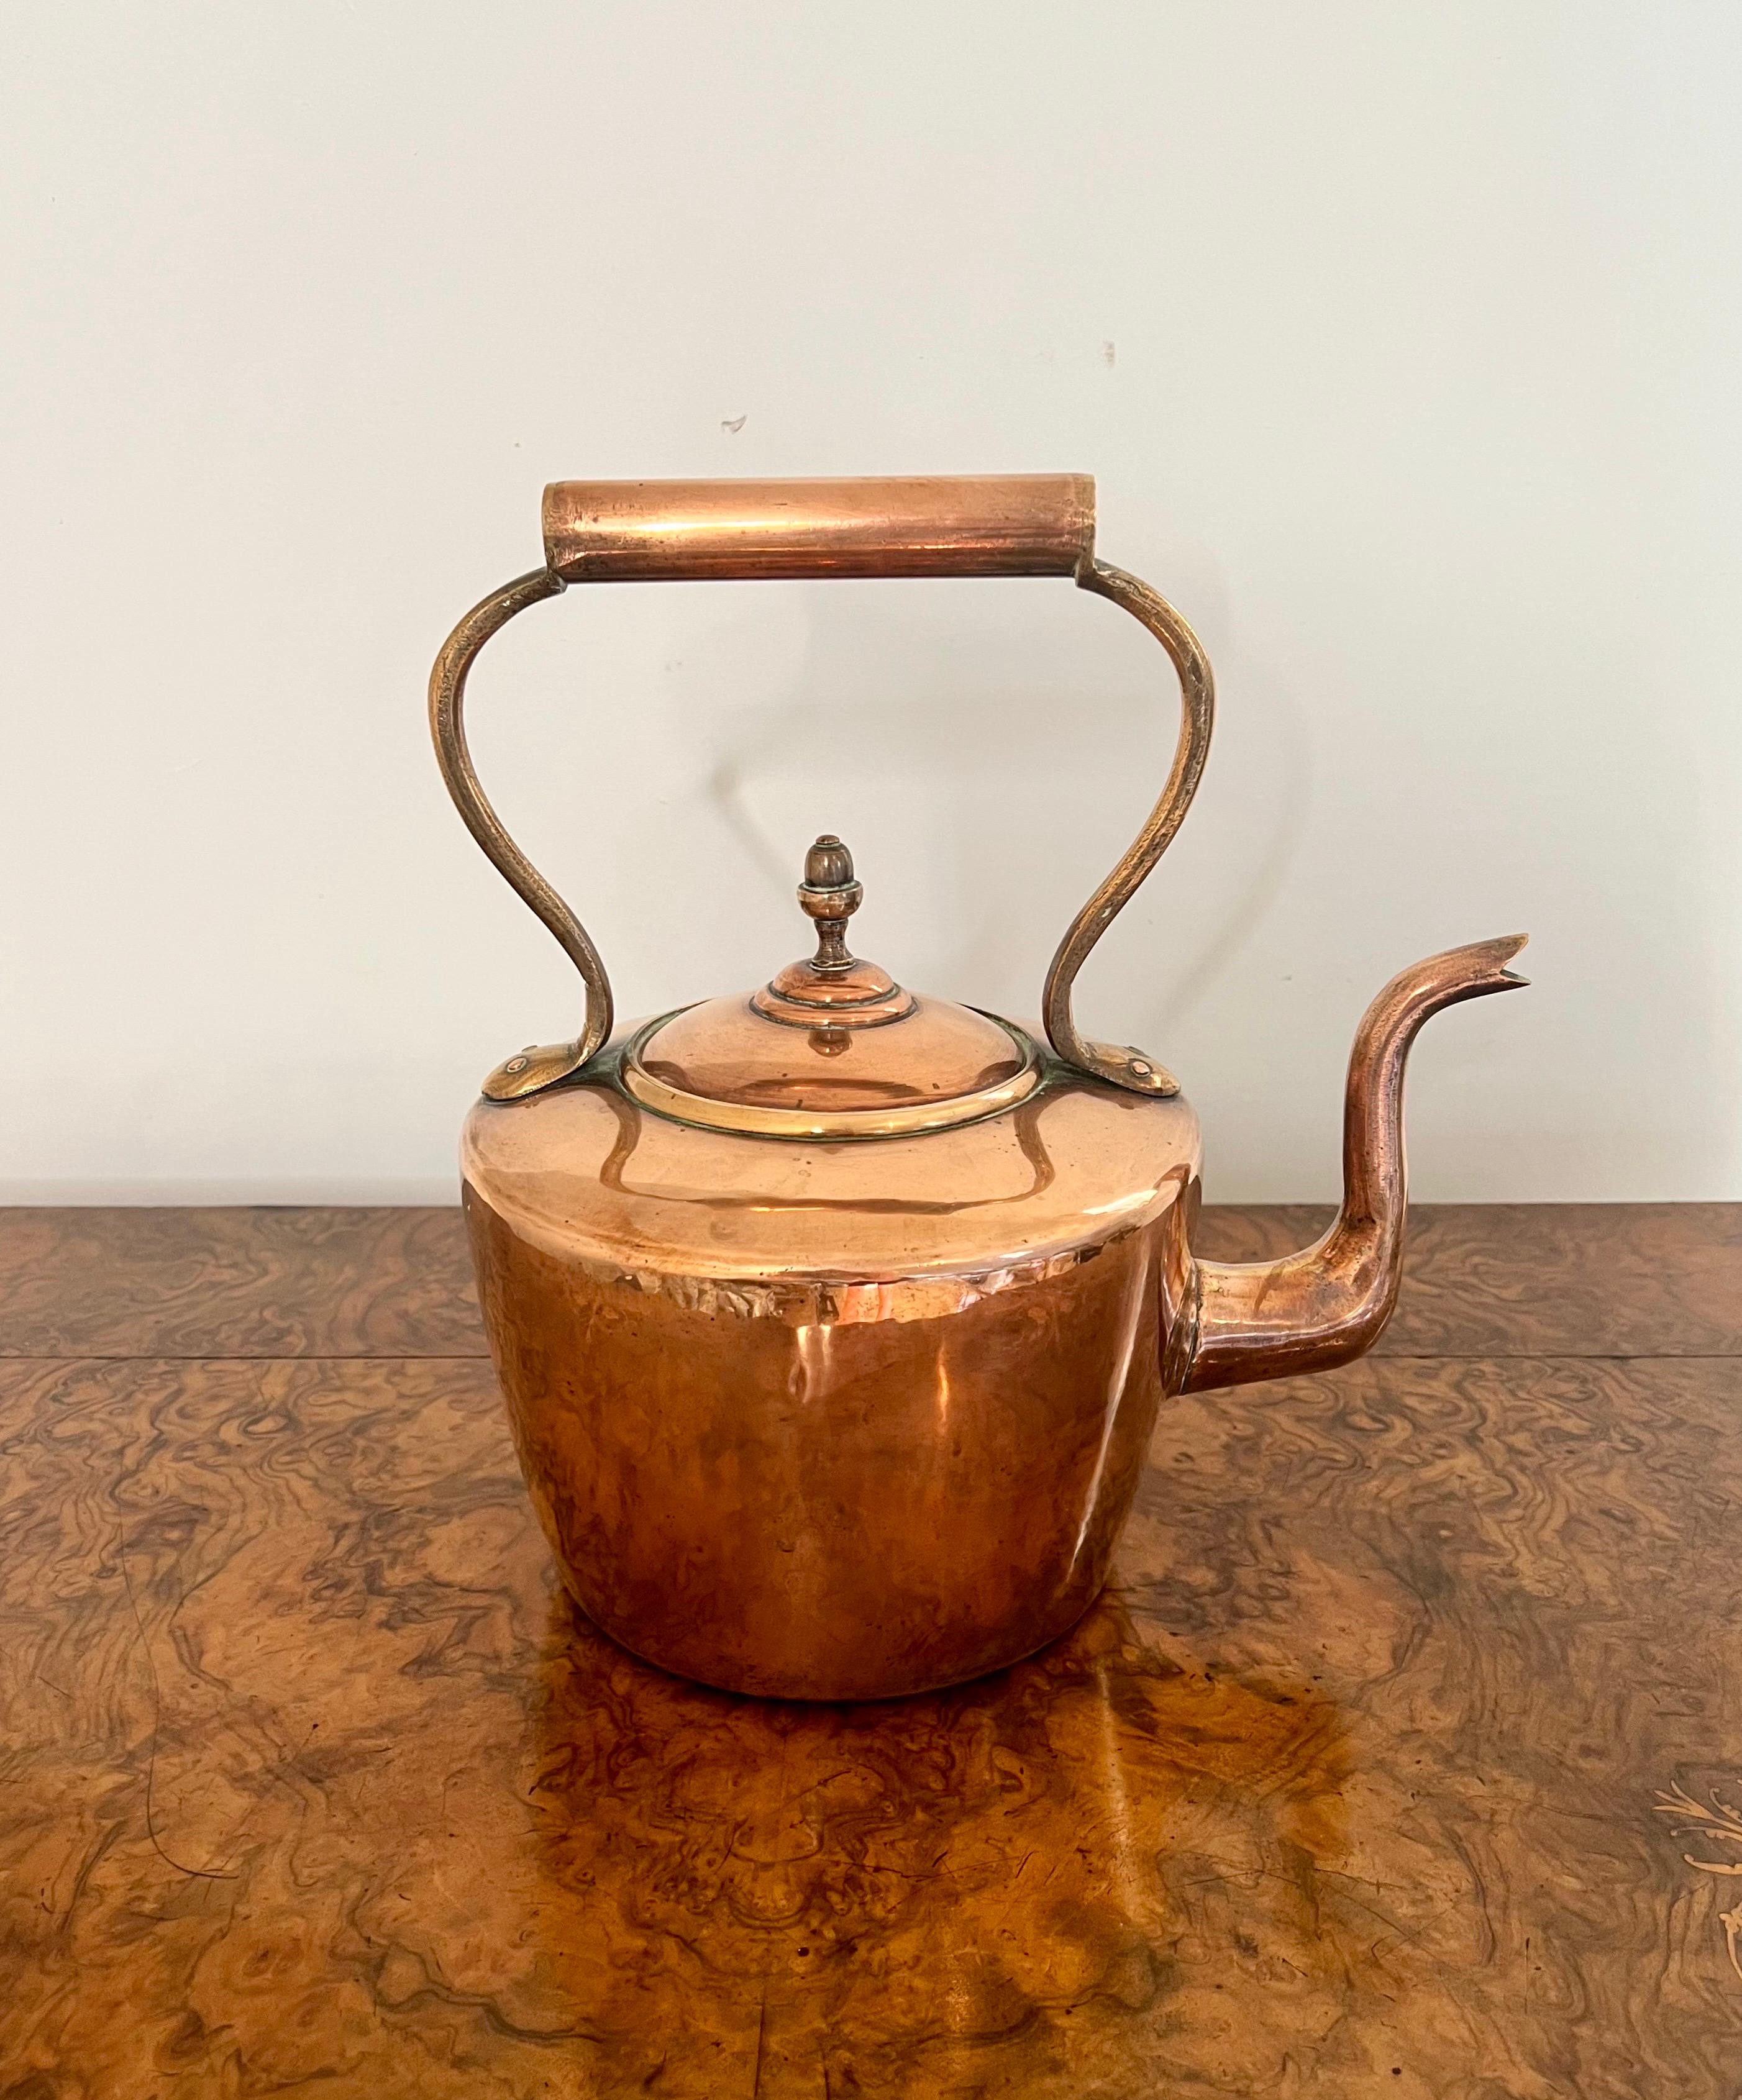 Quality antique George III copper kettle, having a quality George III copper kettle with a shaped handle to the top, removable lid and the original brass knob. 